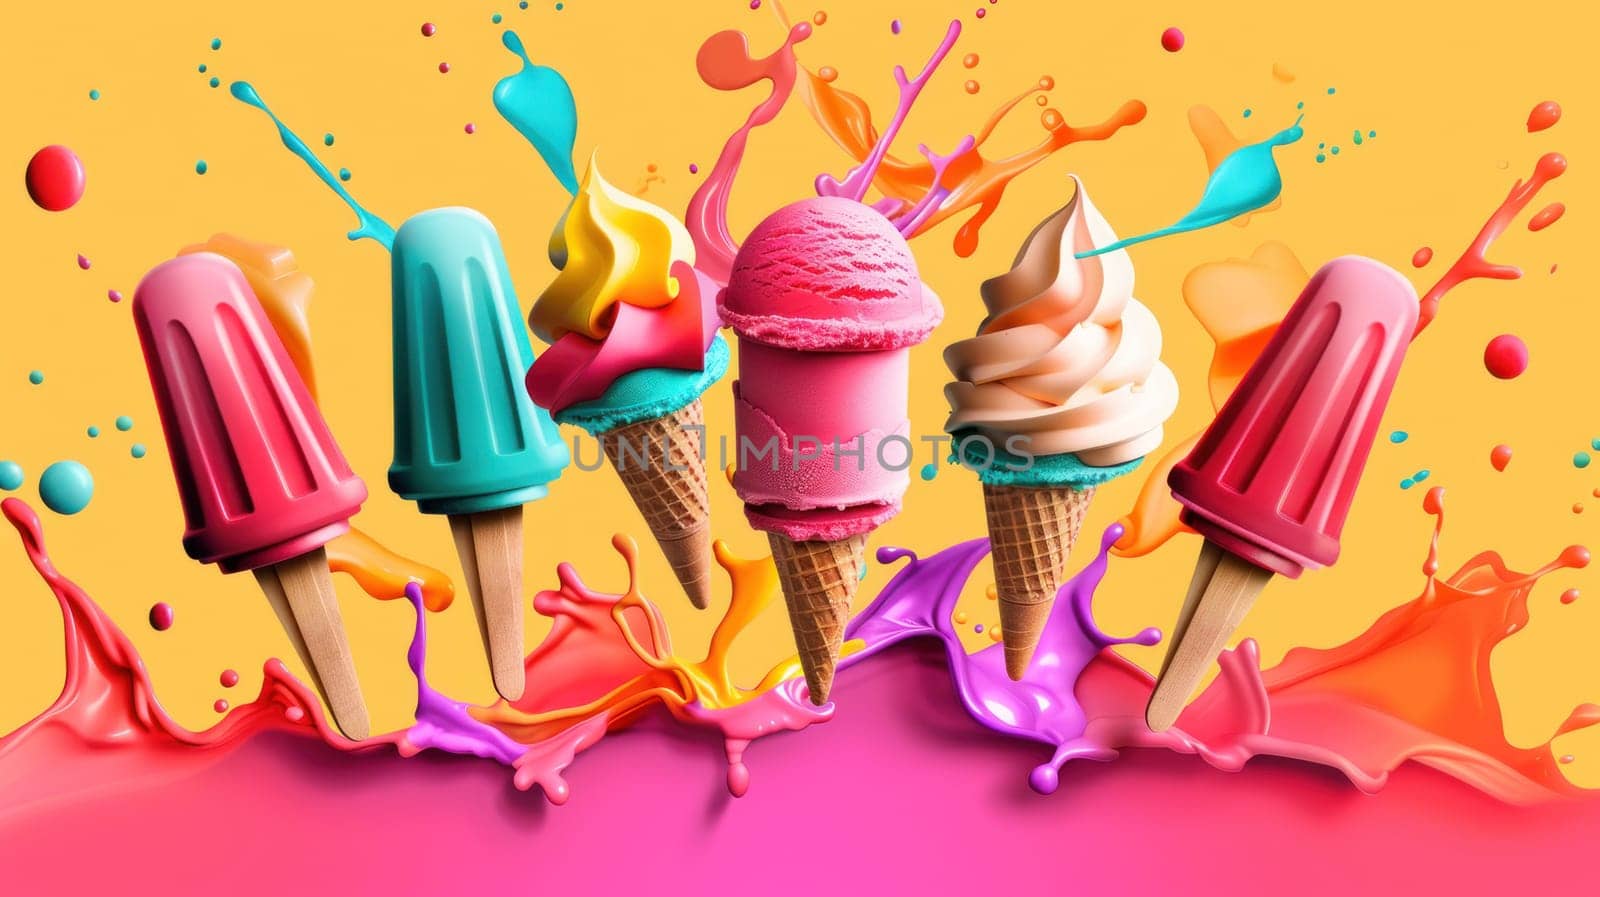 ice cream cones are splattered with colorful paint, creating a fun by golfmerrymaker